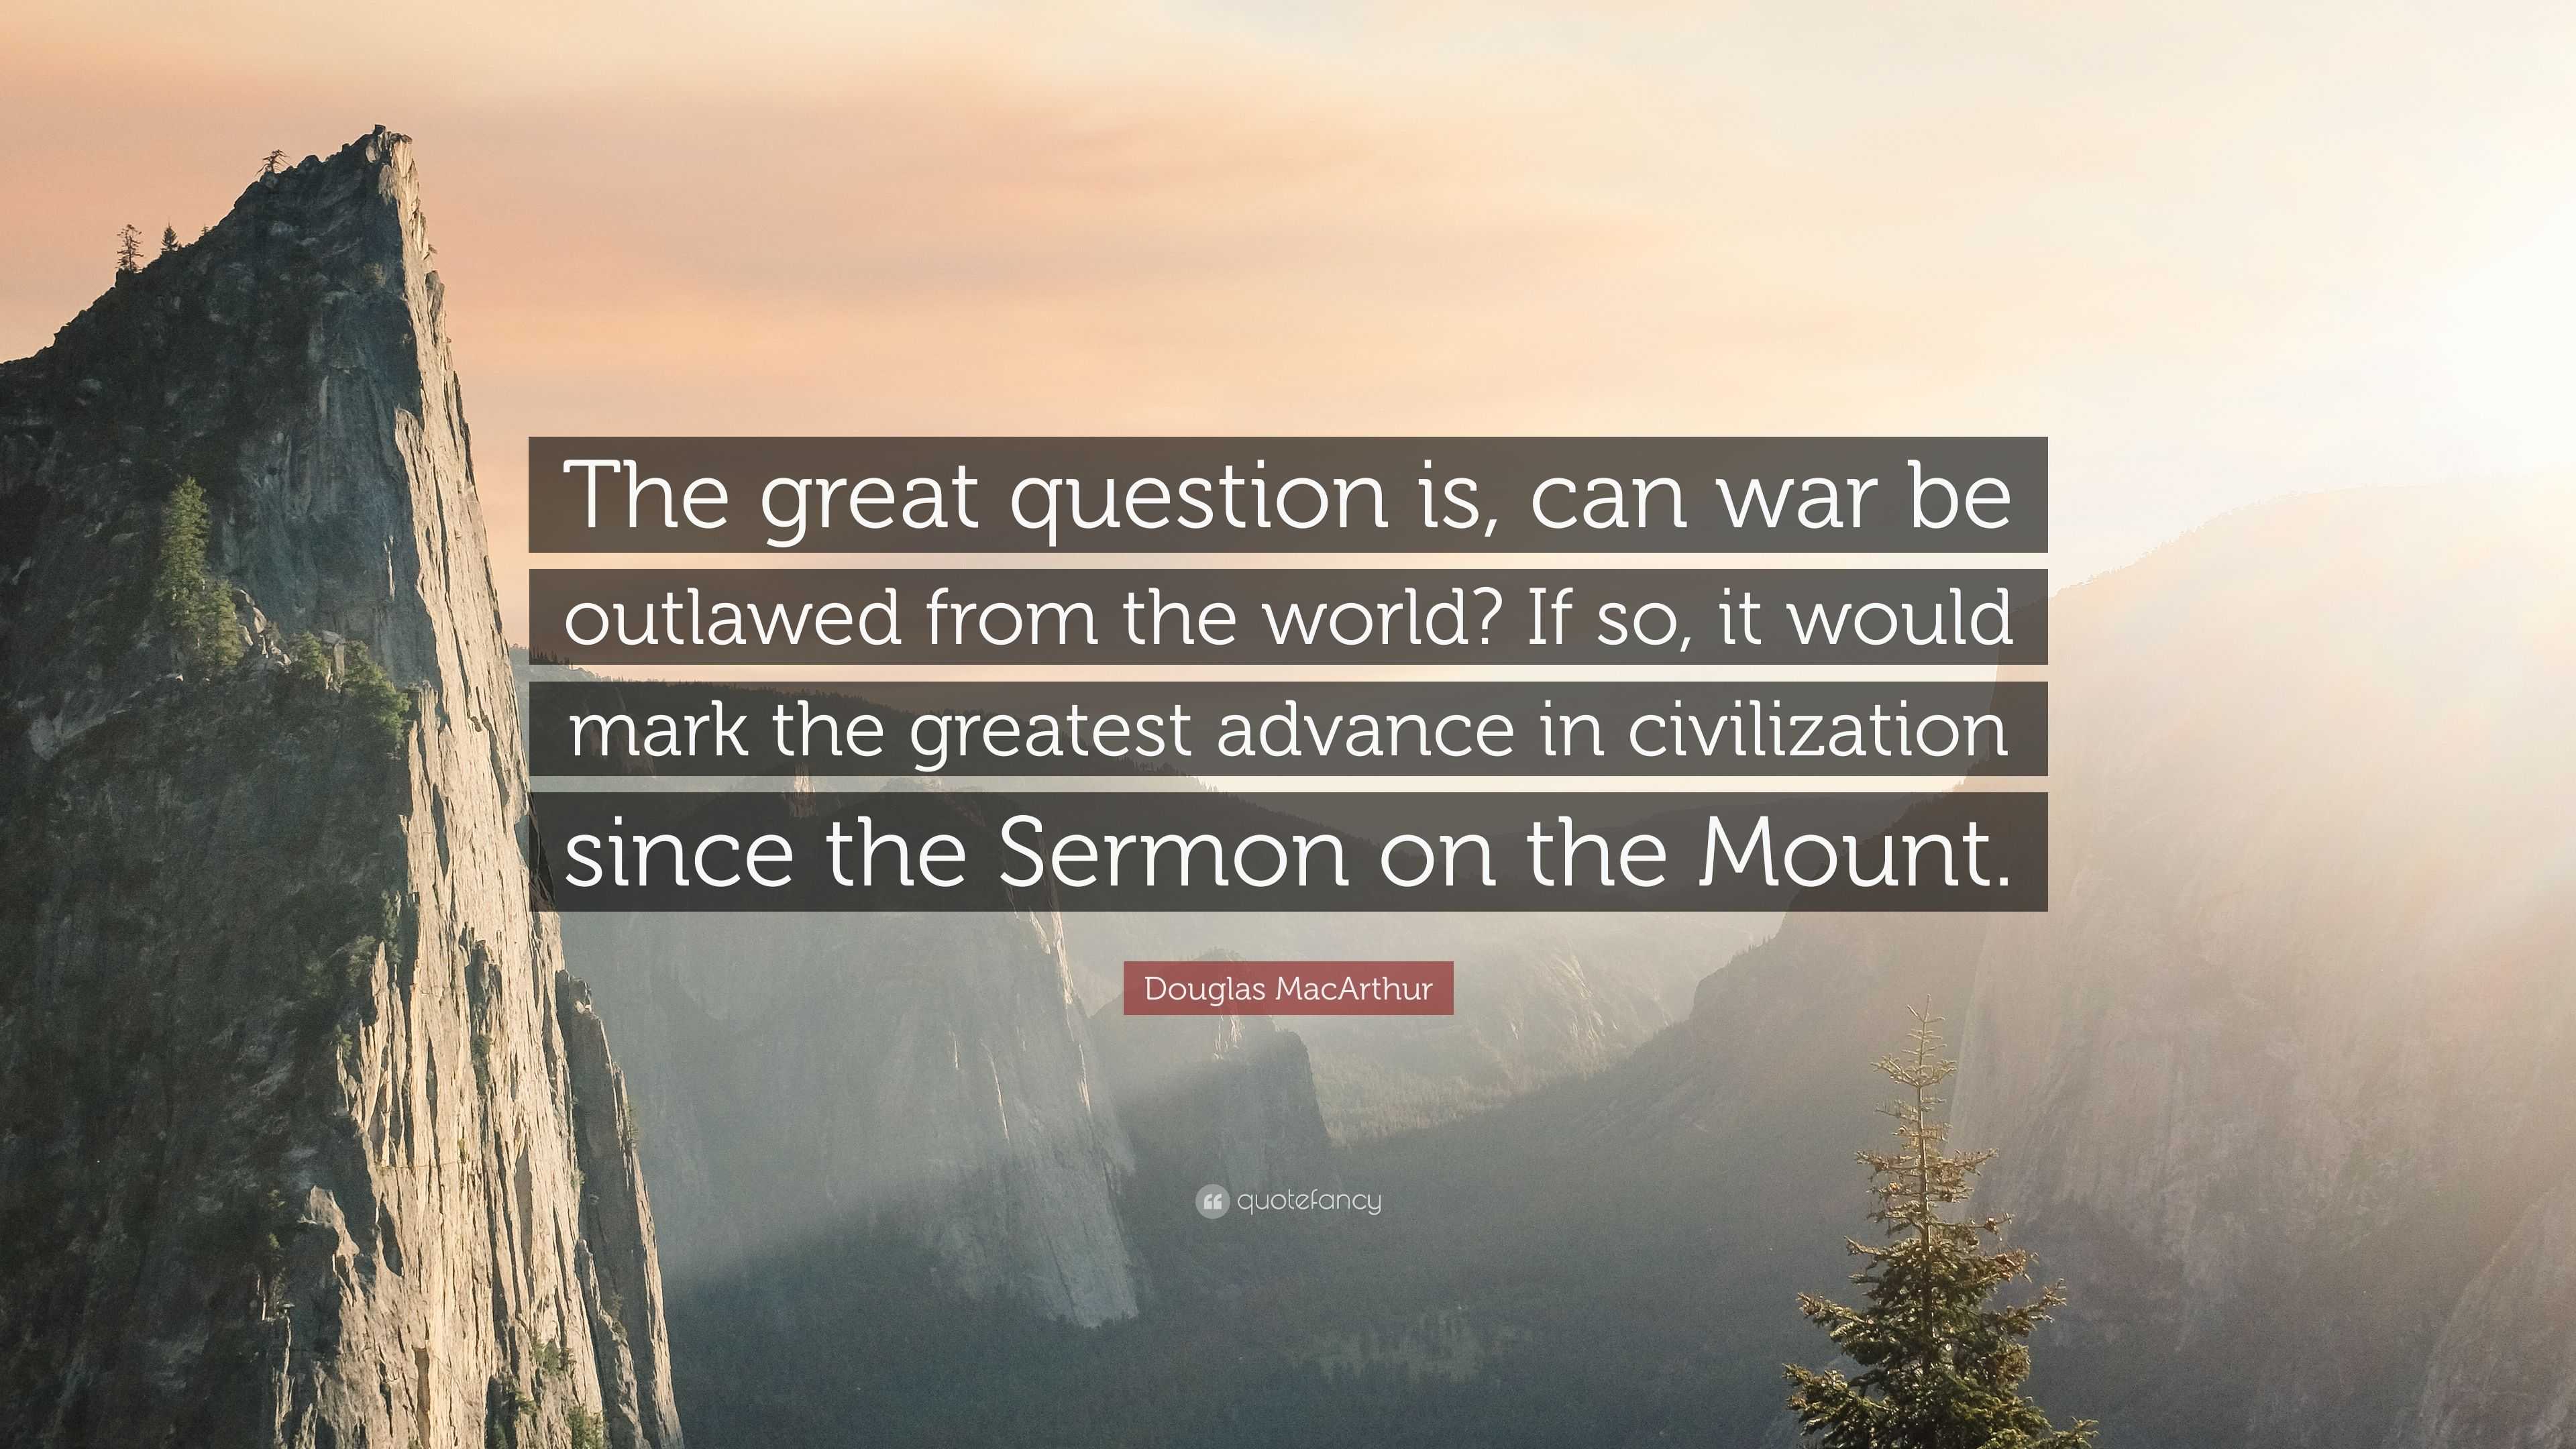 Douglas MacArthur Quote: “The great question is